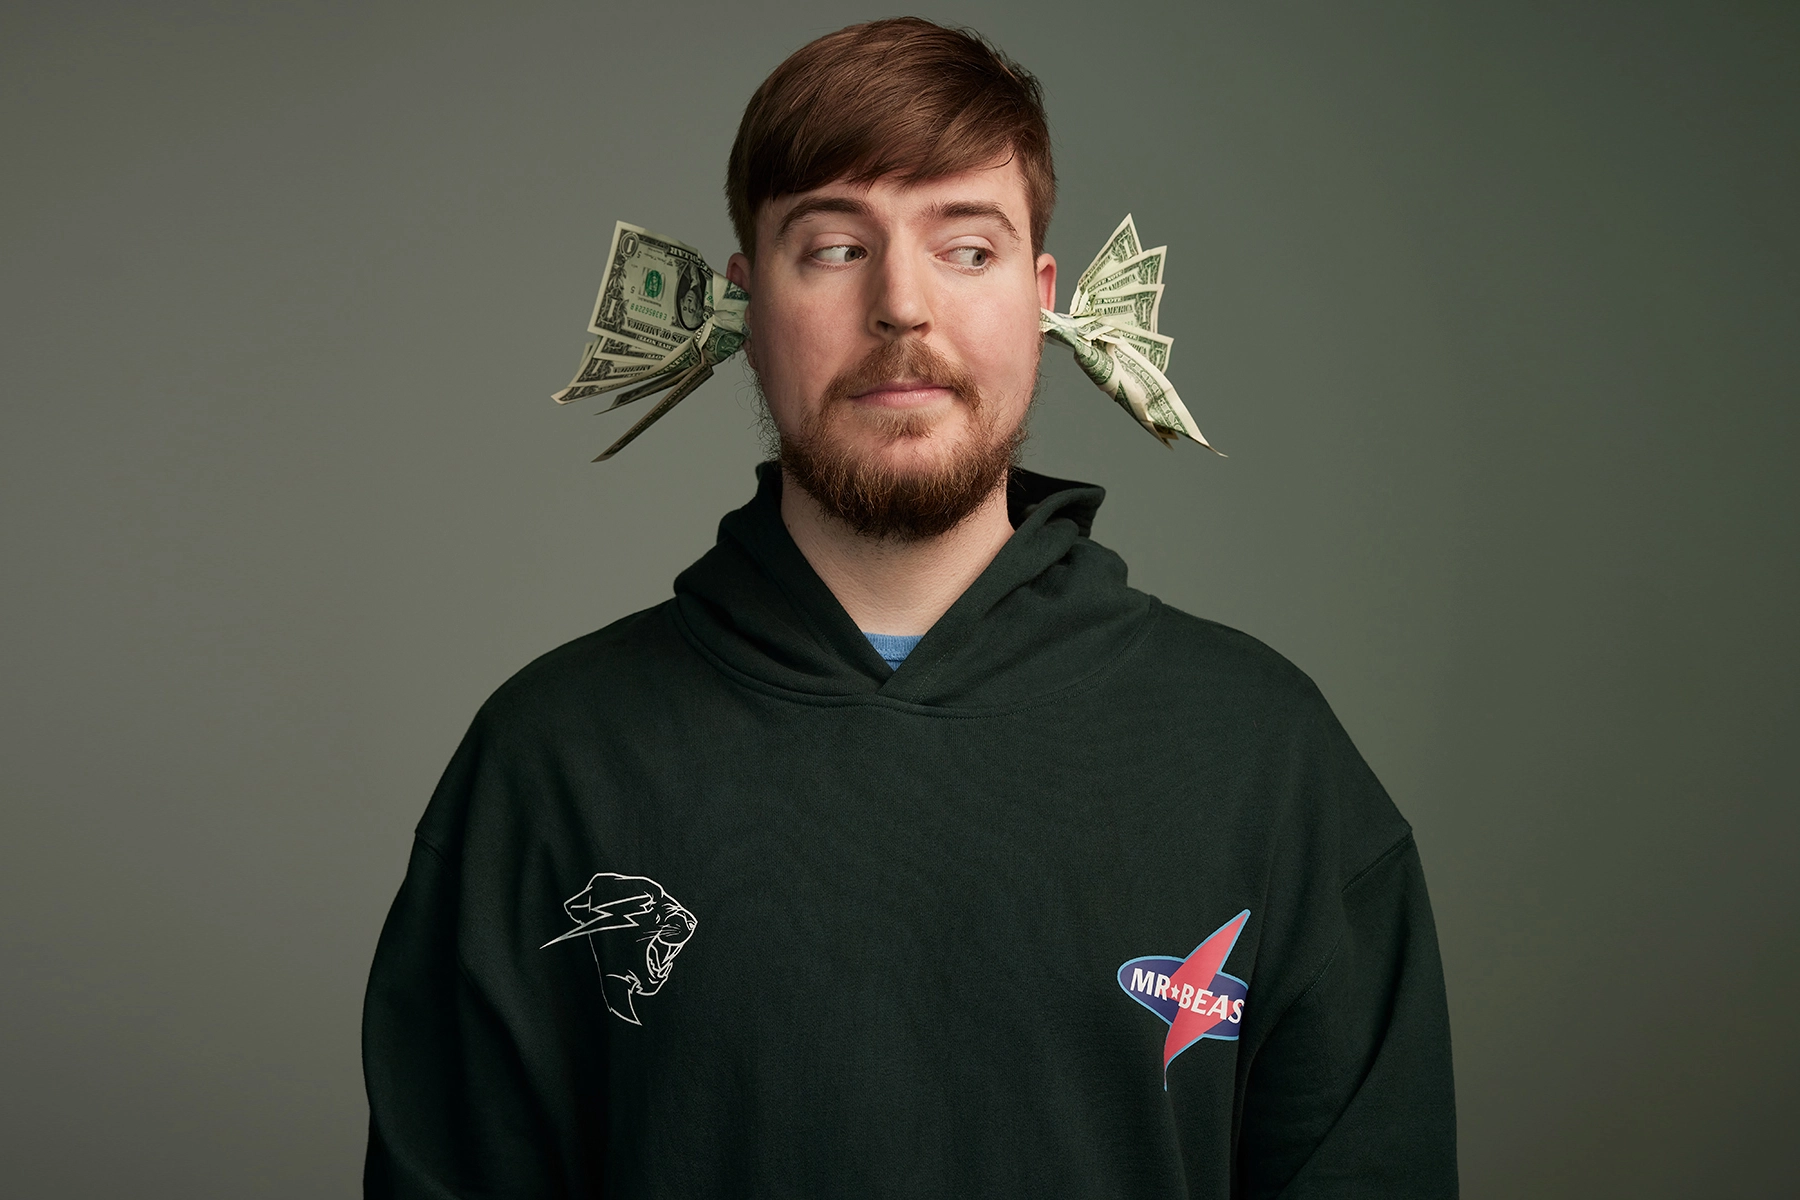 MrBeast Now the Most Subscribed Youtuber in the World: How to Go Beast Mode and Compete for His Title - Valuetainment